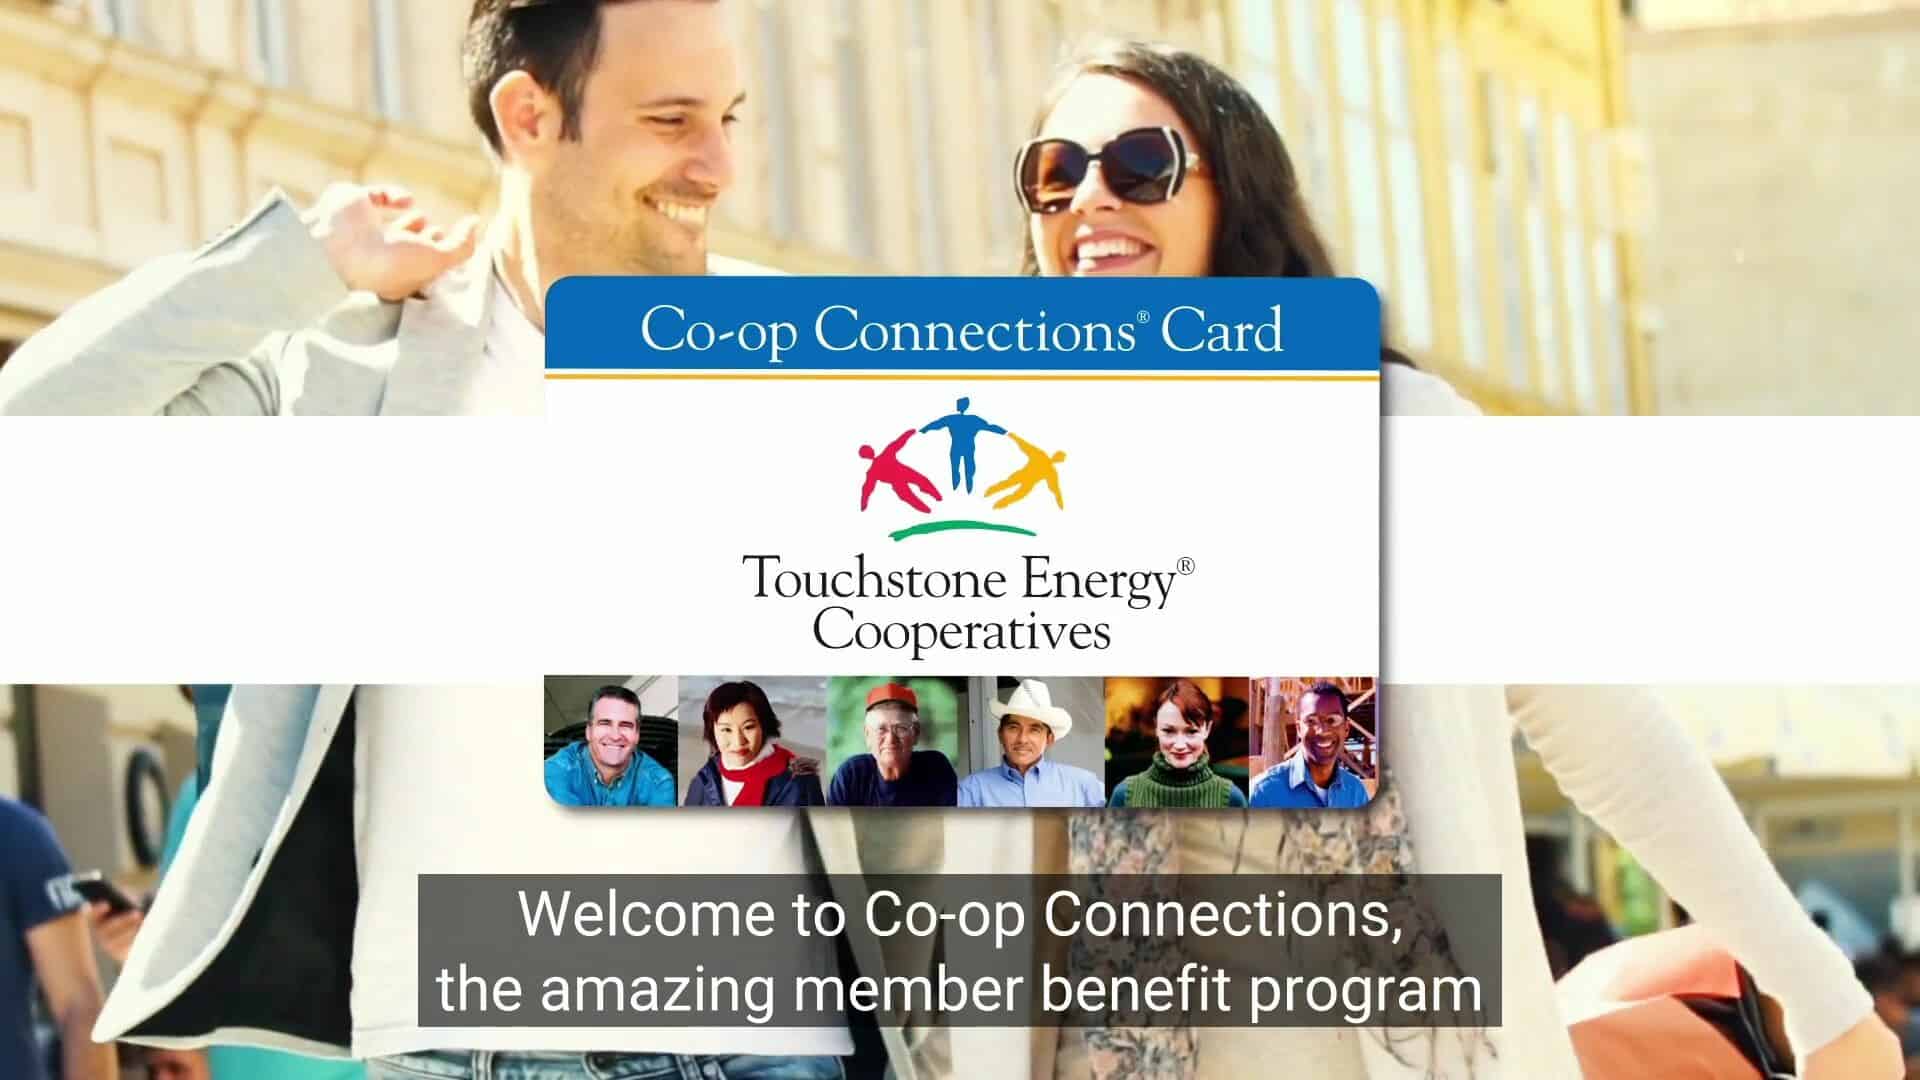 Video: Welcome to Co-op Connections